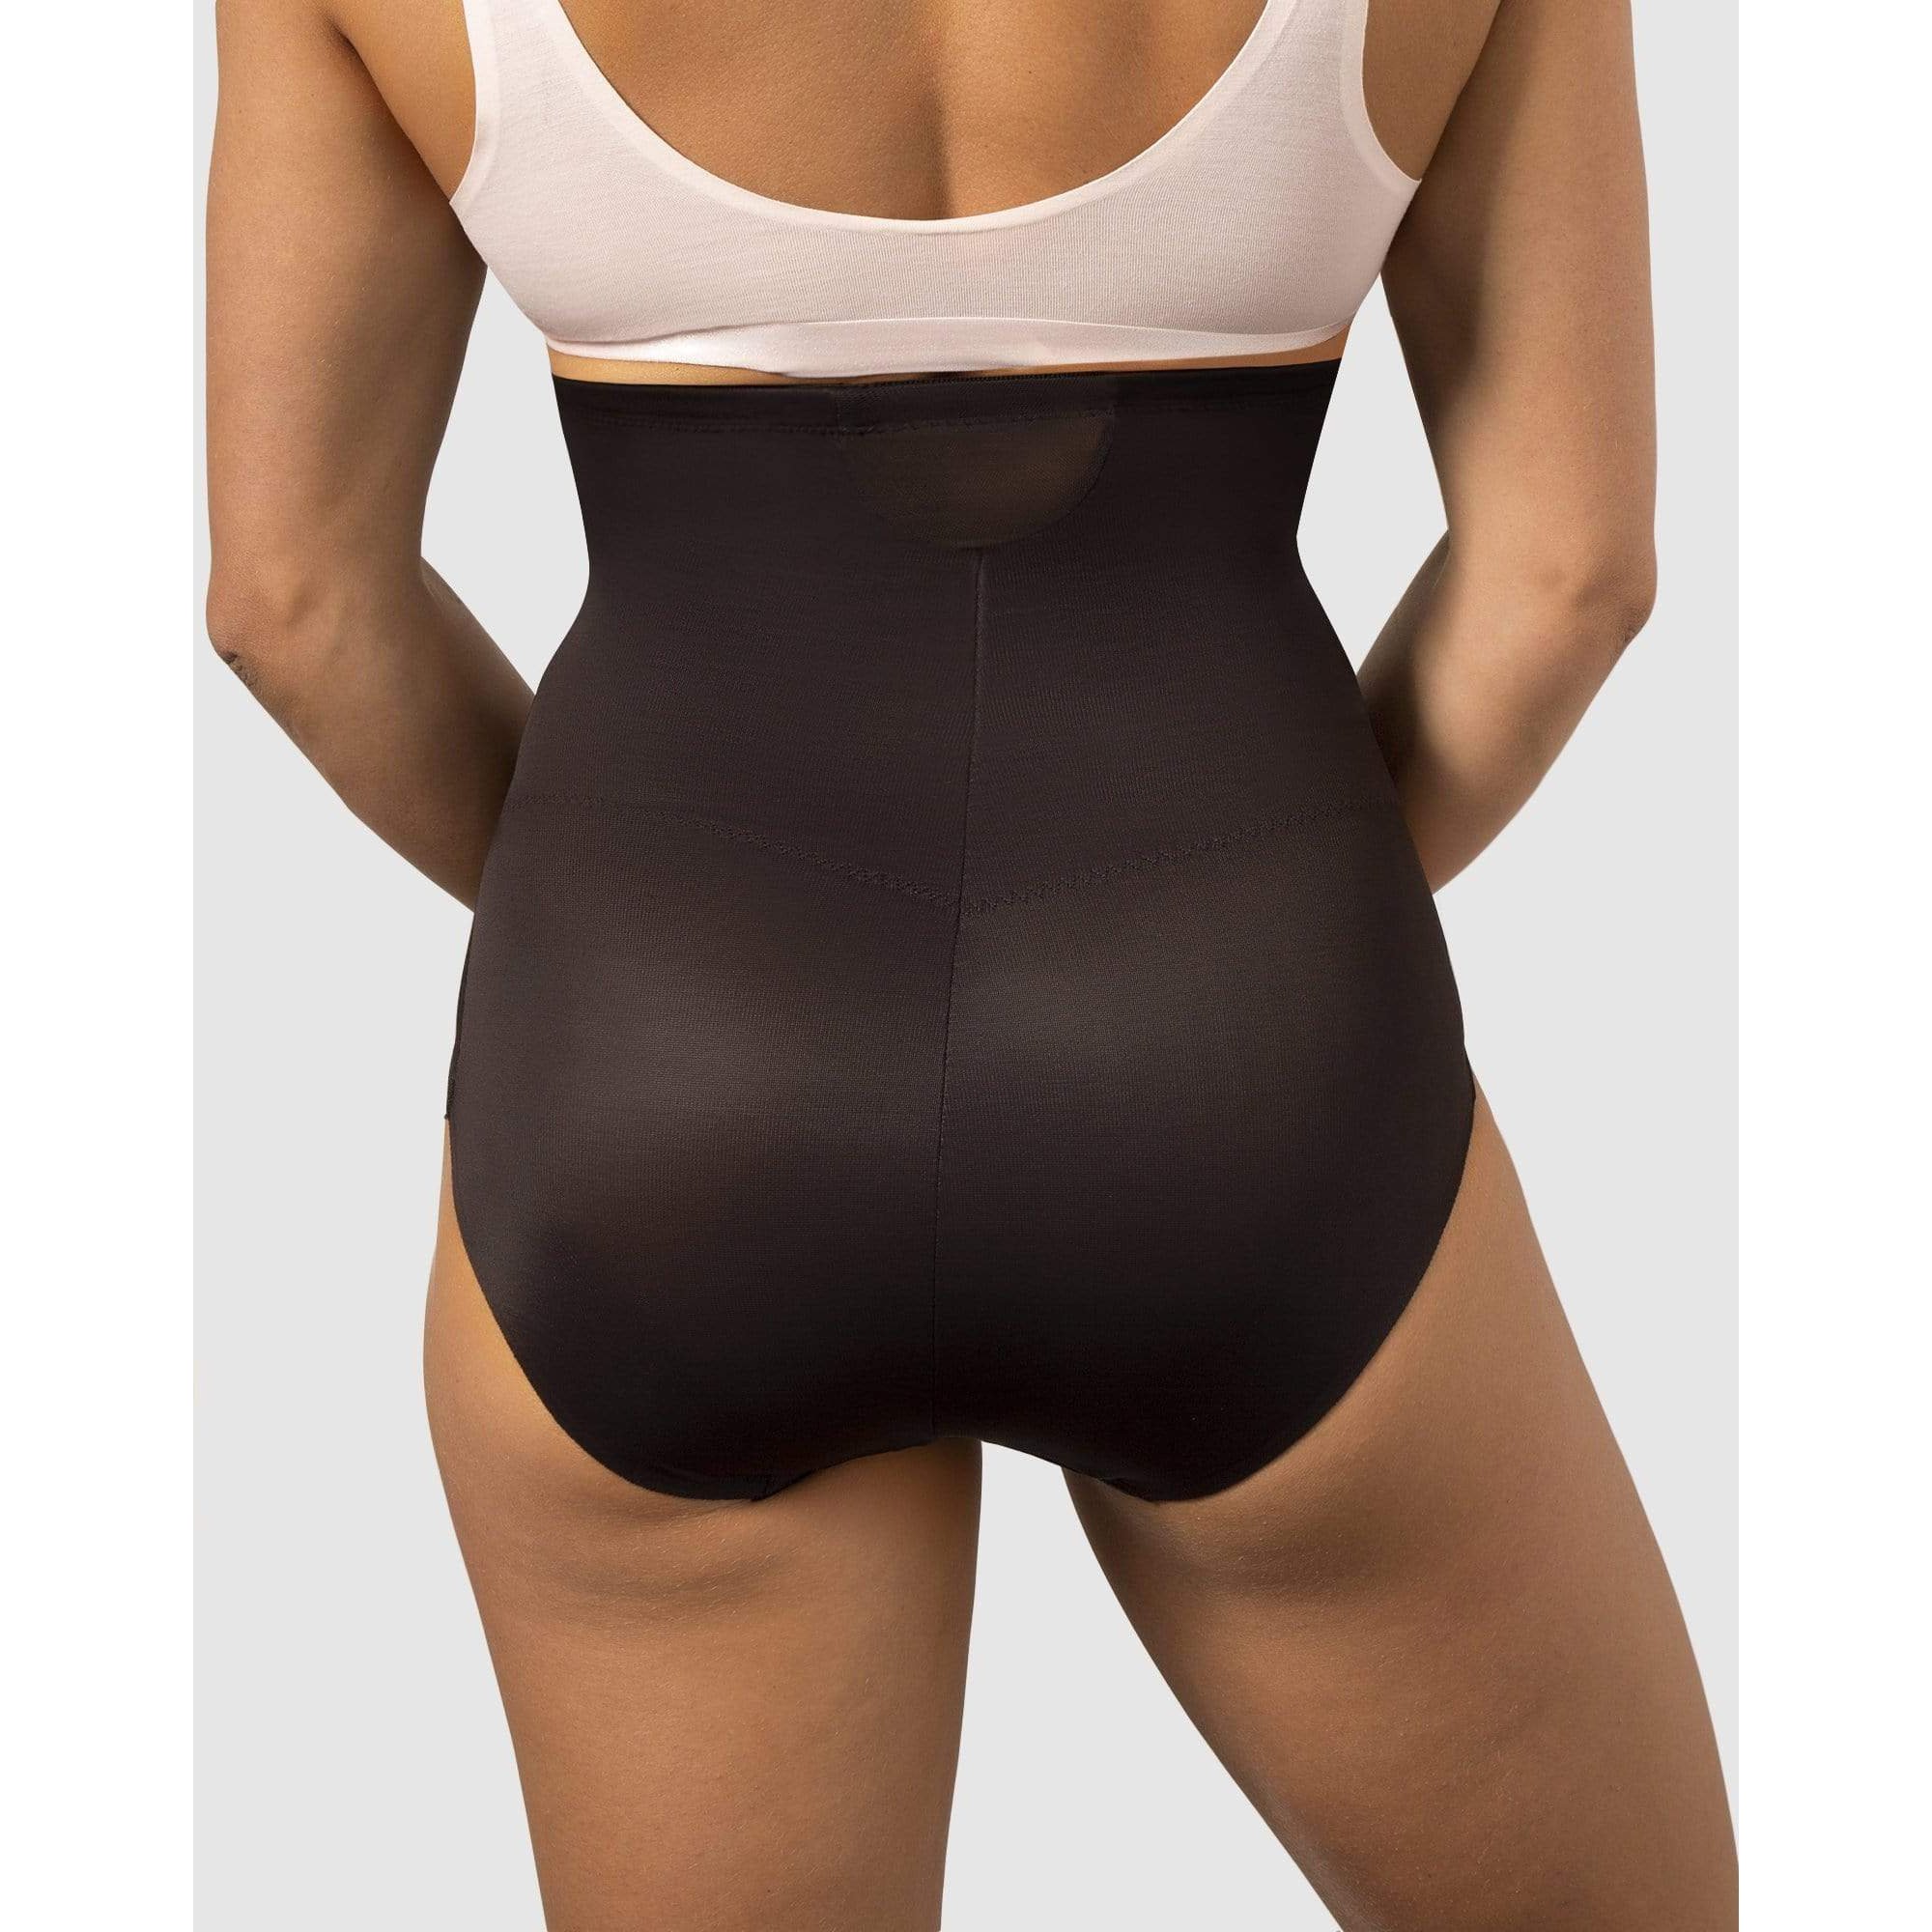 Miraclesuit Shapewear Surround Support Shaping Hi Waist Brief from Illusions Lingerie in Melbourne